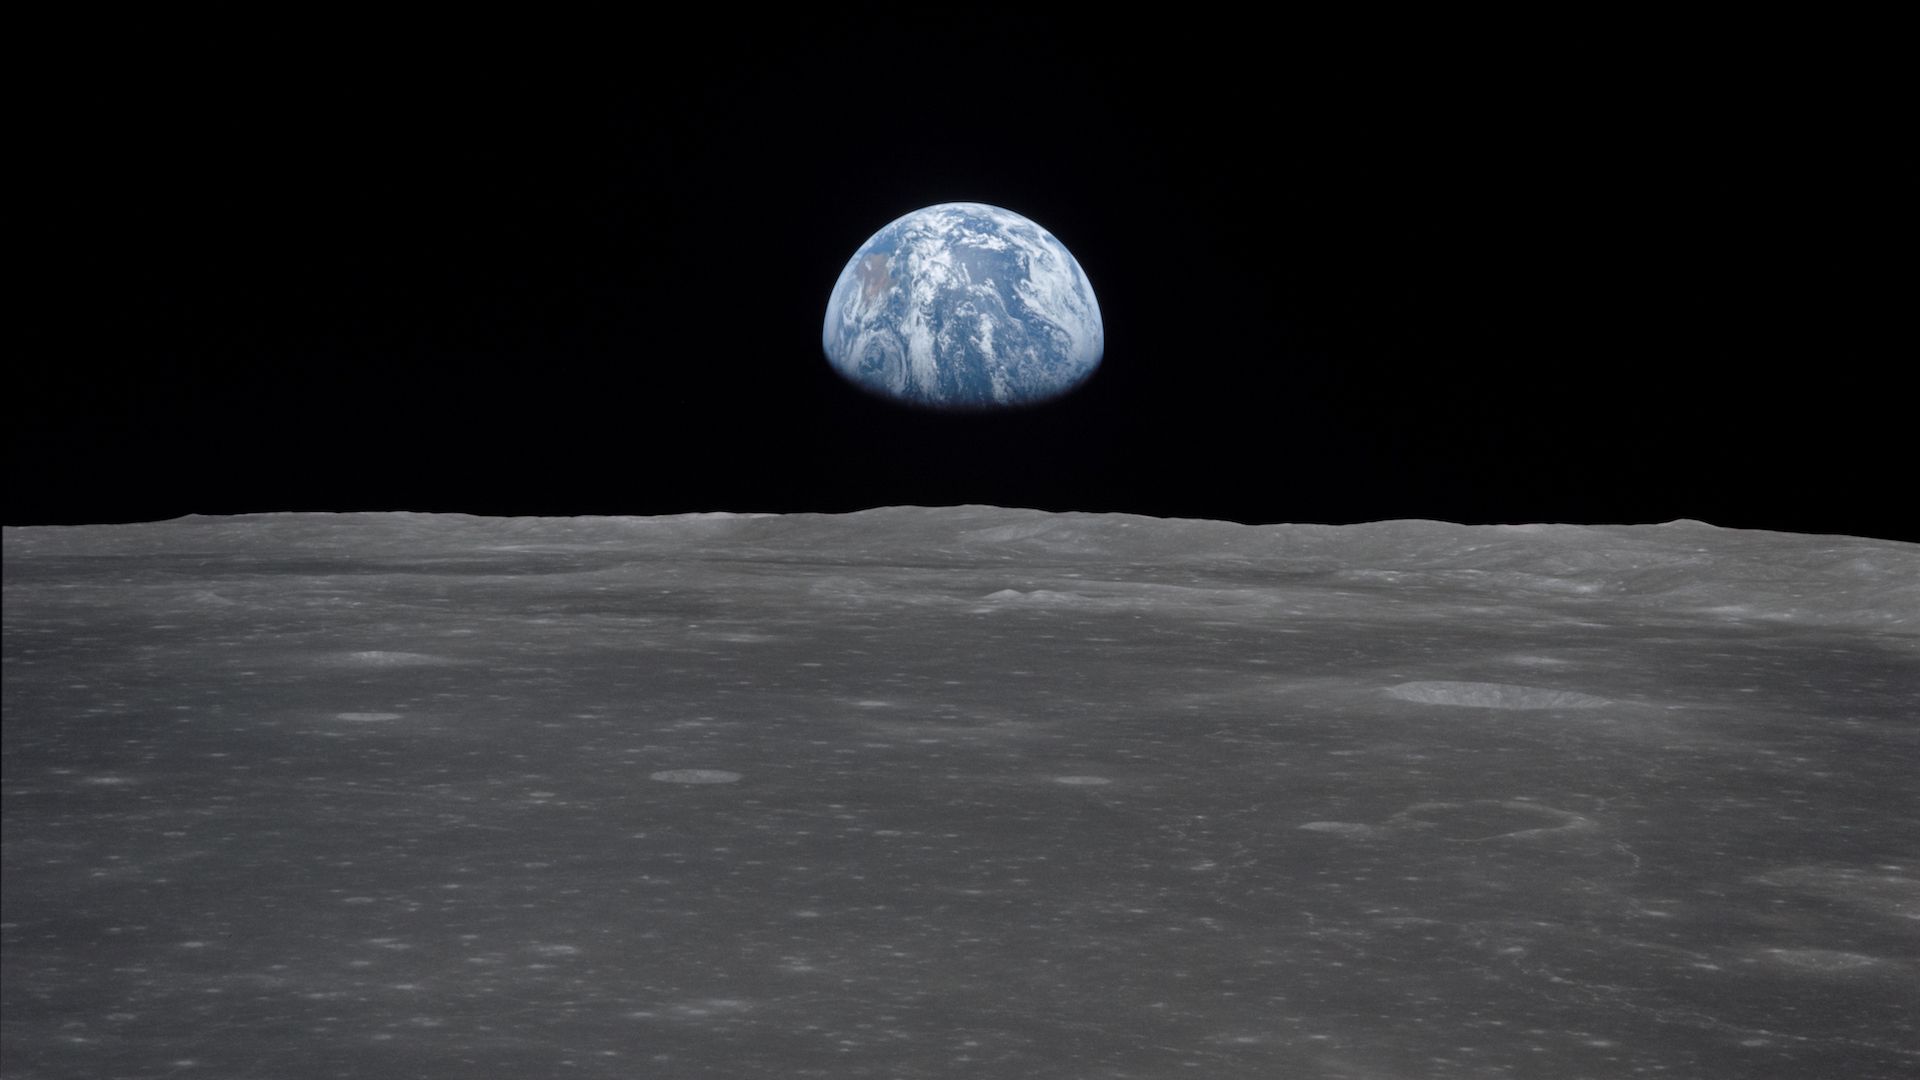 Earth seen from the moon.